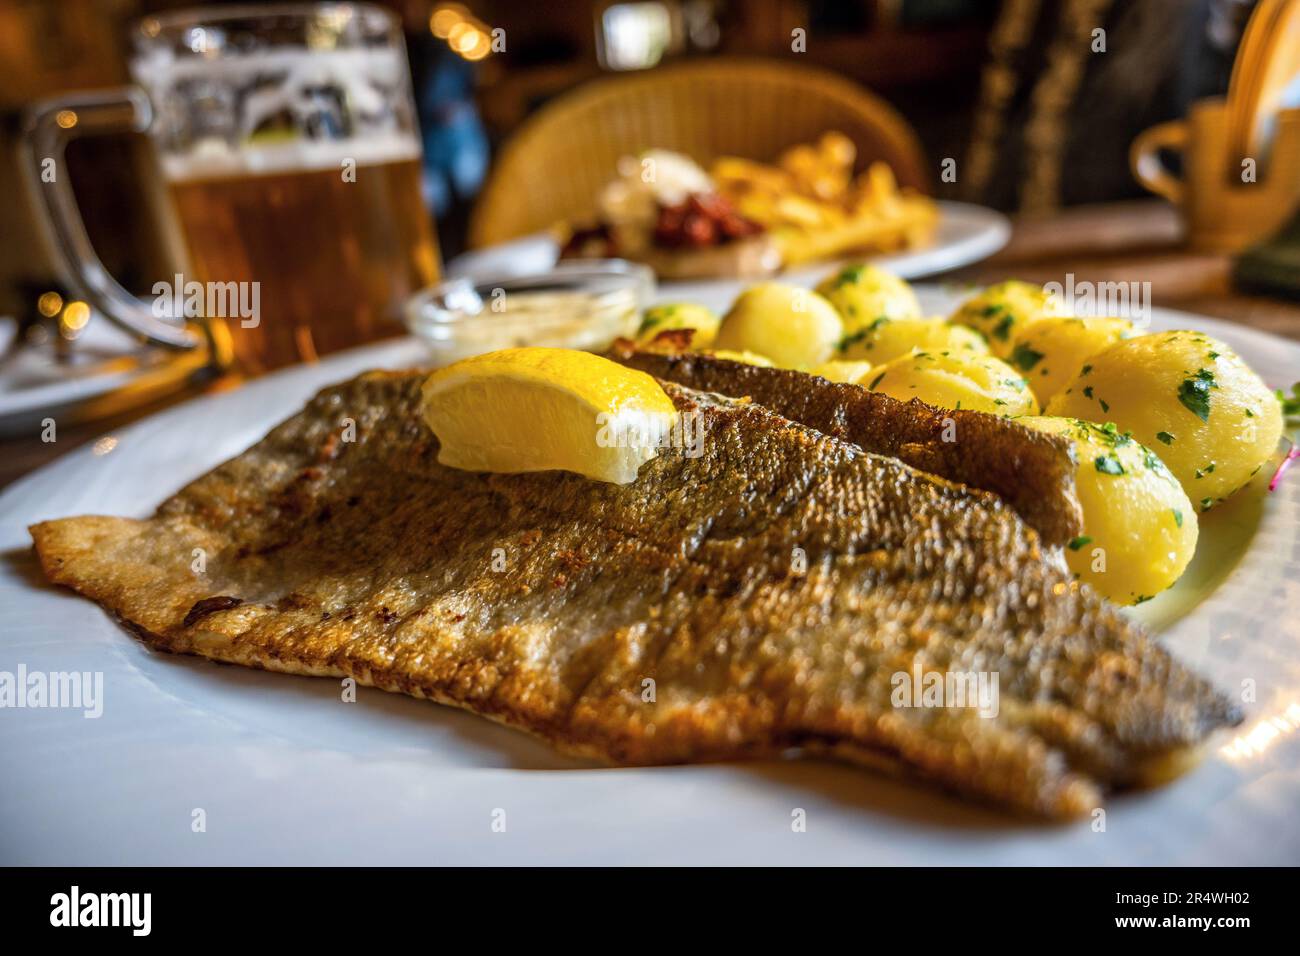 Golden fried zander fish with potato, beer at restaurant table. Stock Photo